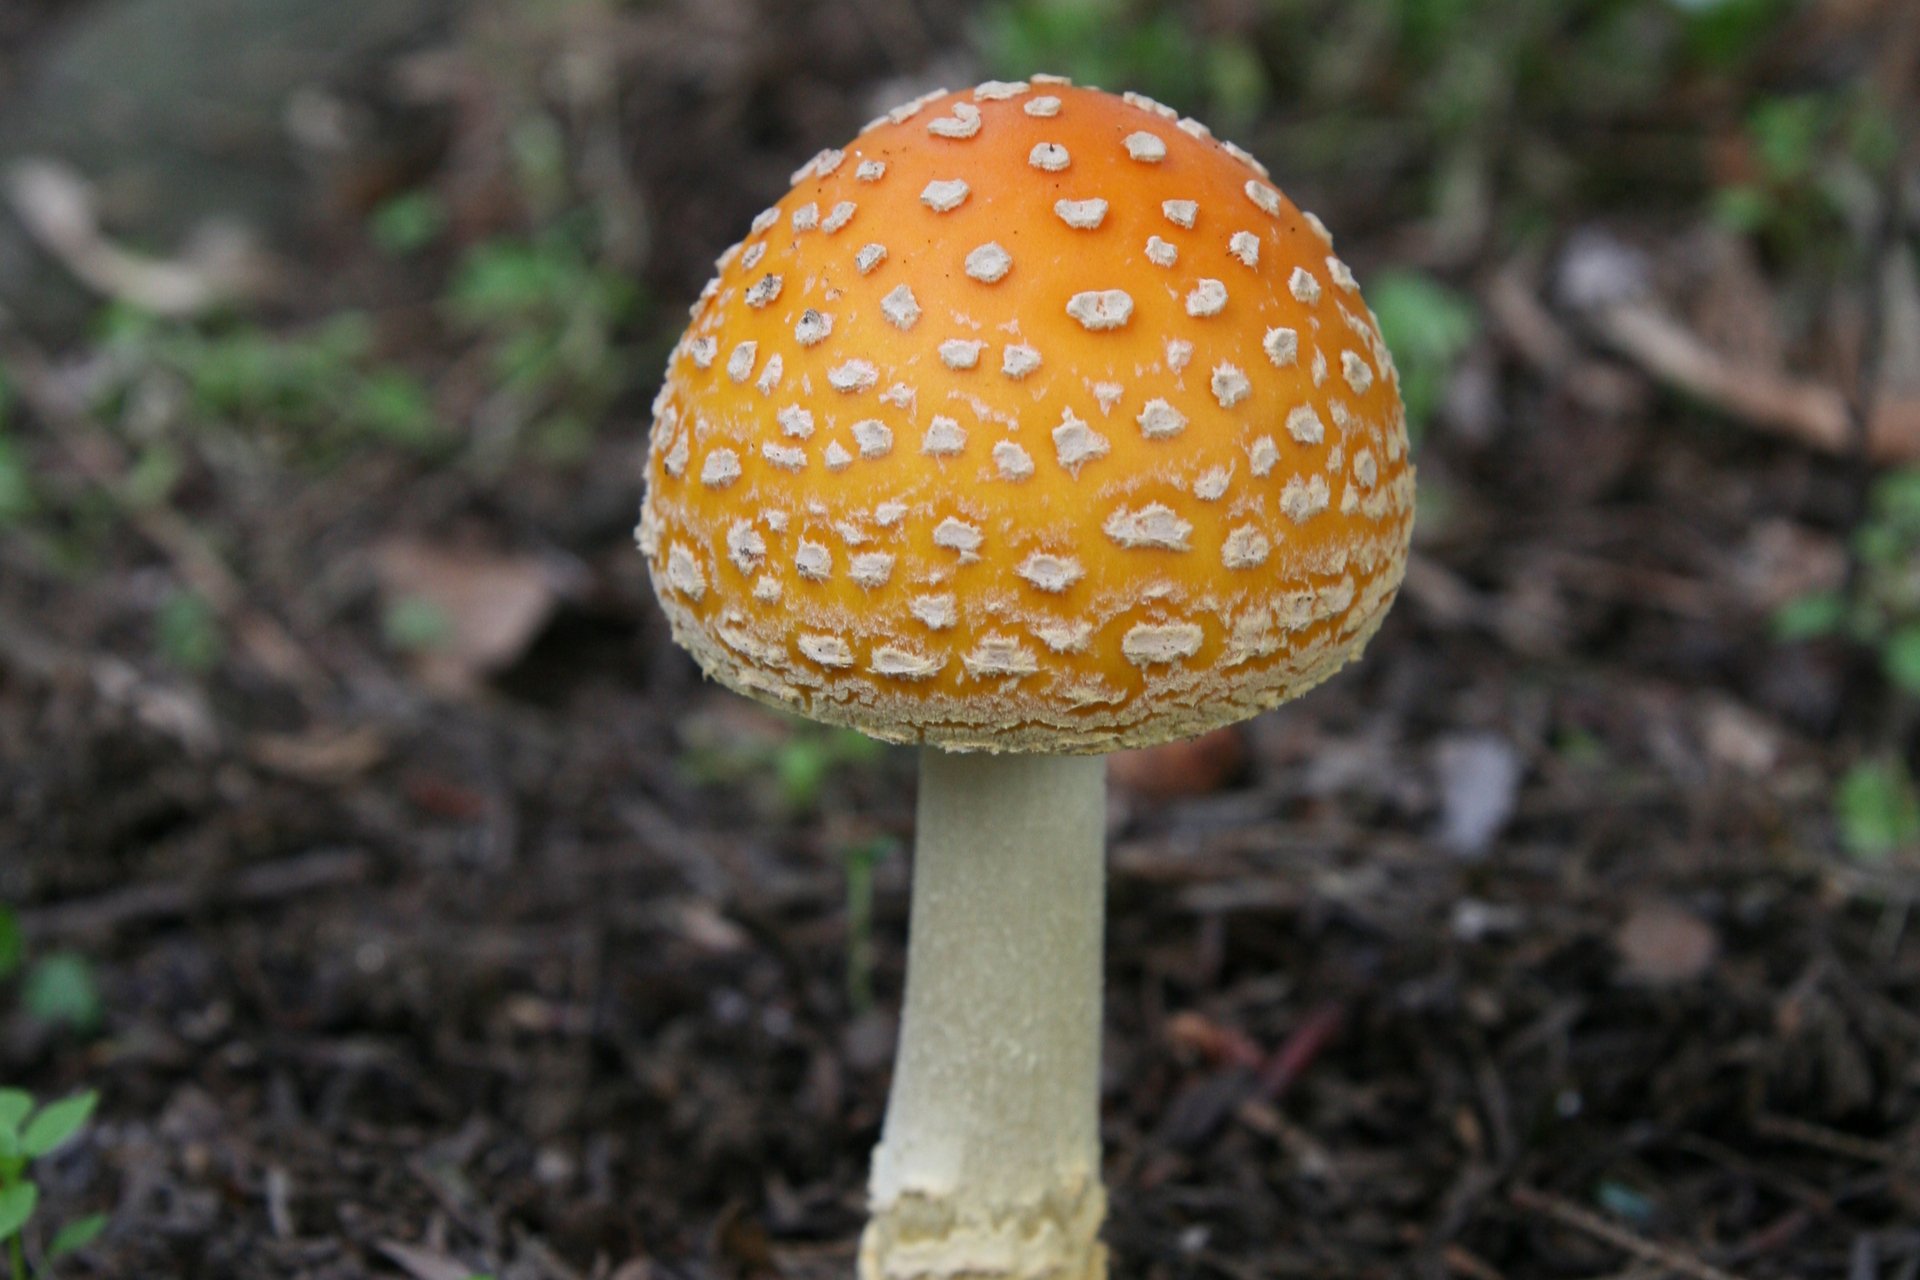 Yellow mushroom with white dots on cap